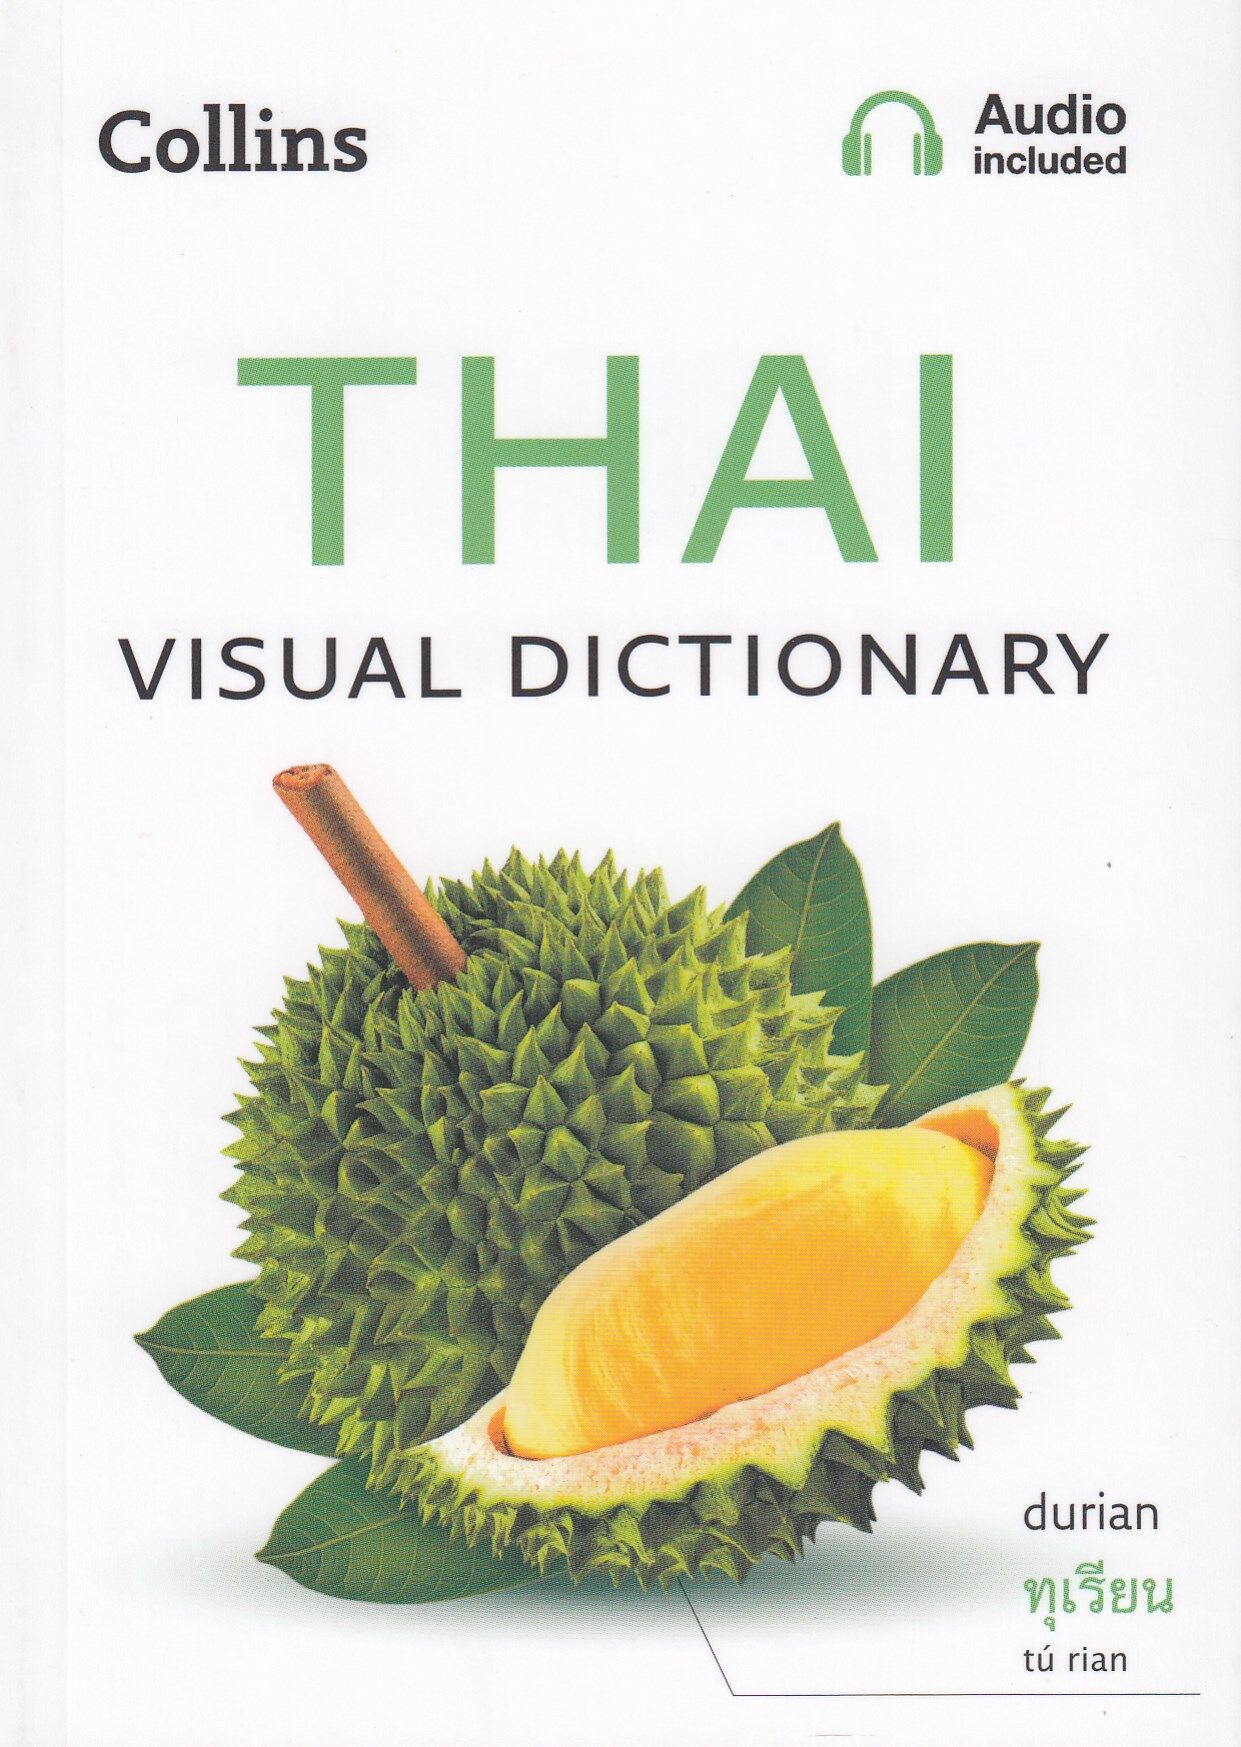 THAI VISUAL DICTIONARY by DK Today